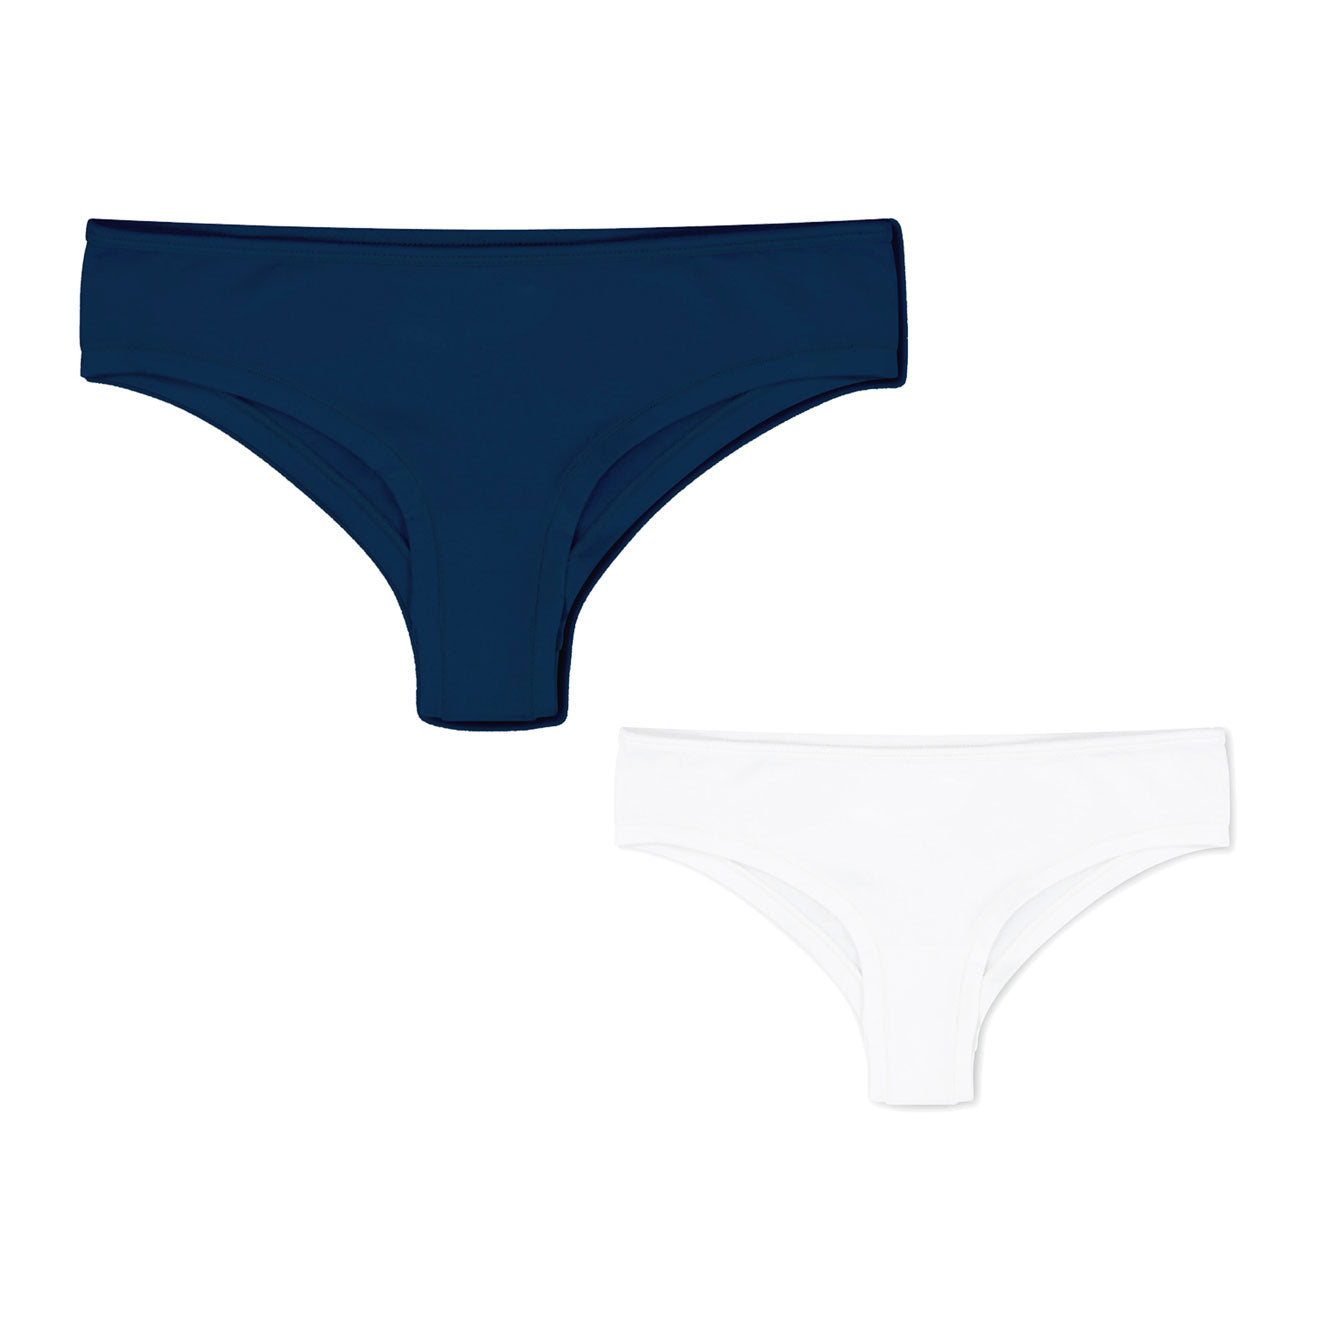 navy white ladies underwear, everyday cheeky fit briefs, first fit promise 2 pack